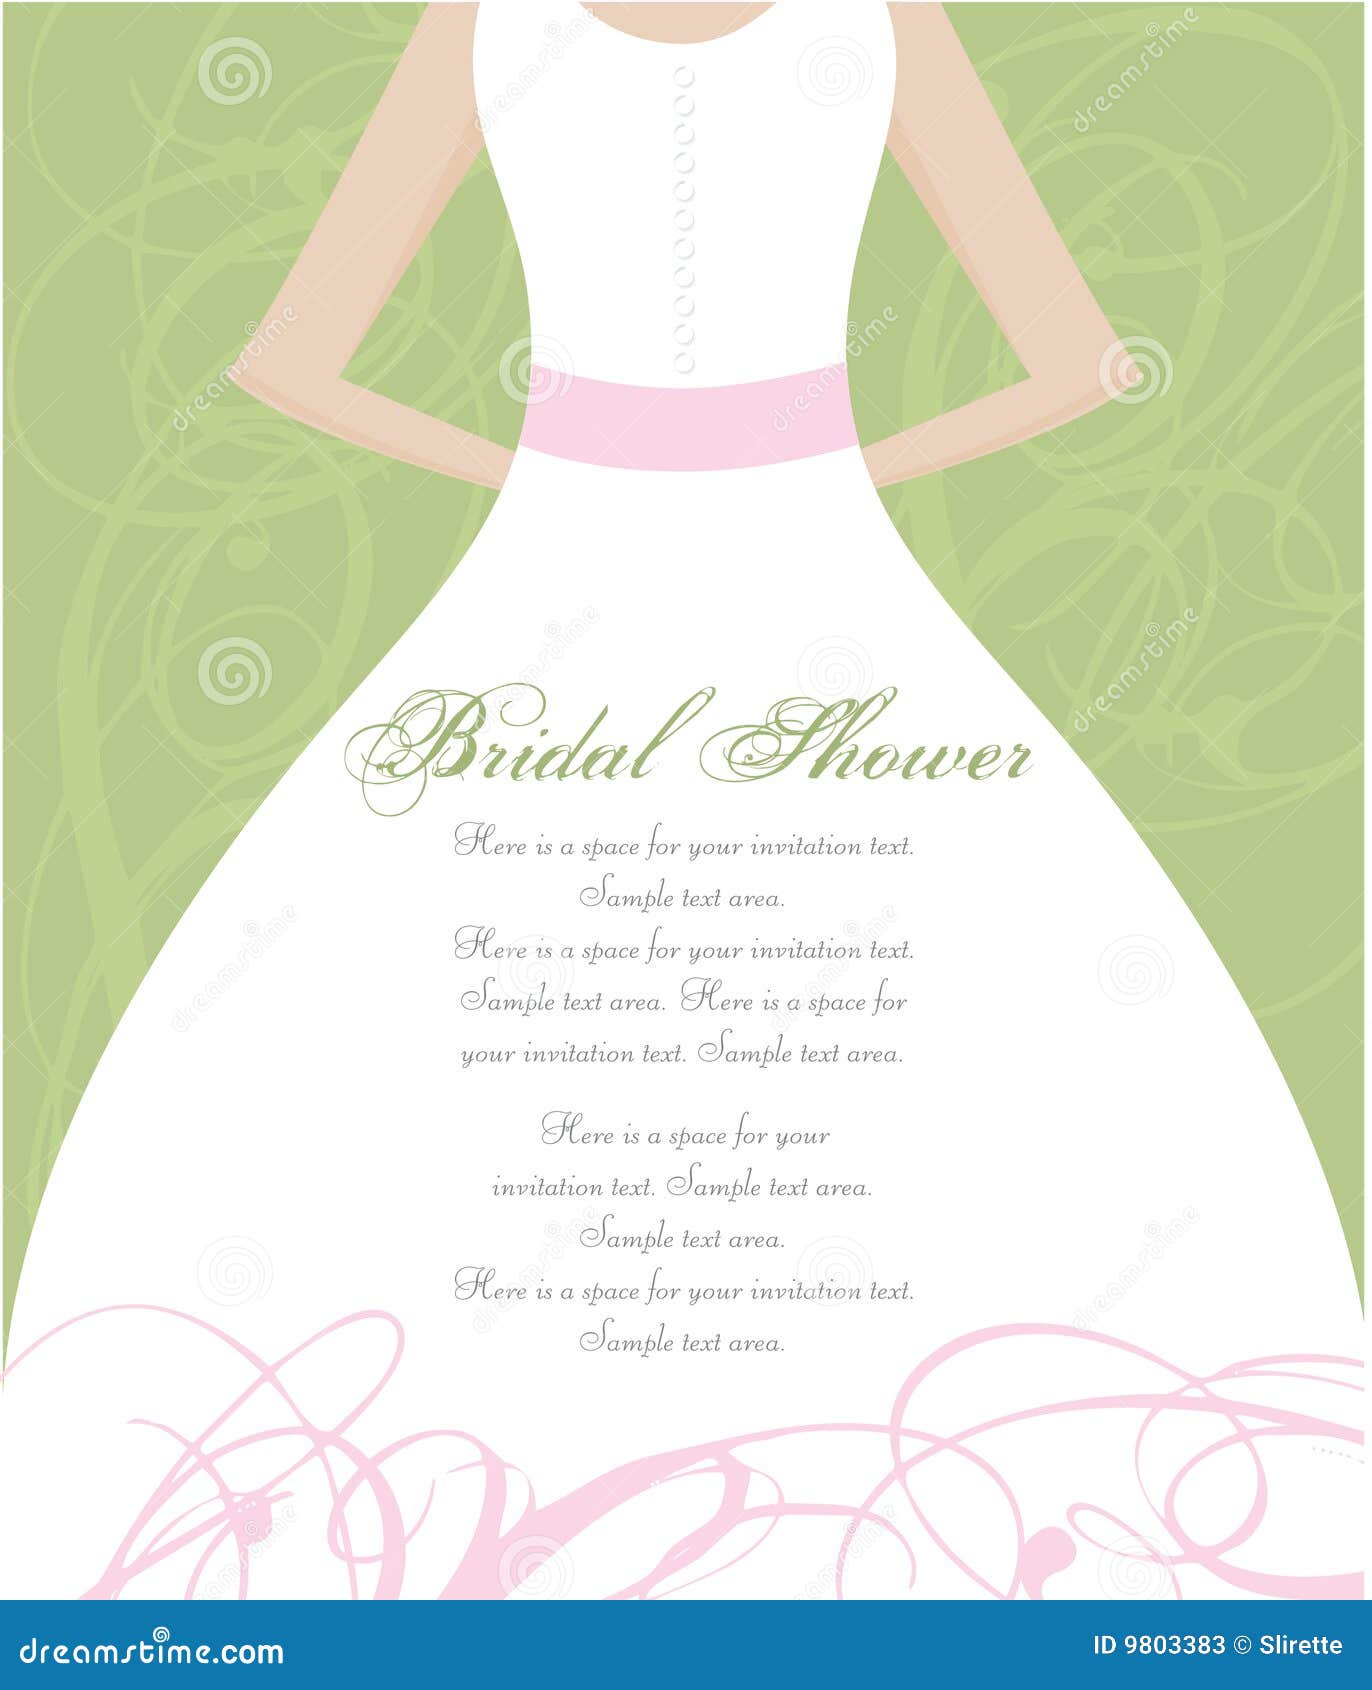 free clipart for wedding shower invitations - photo #17